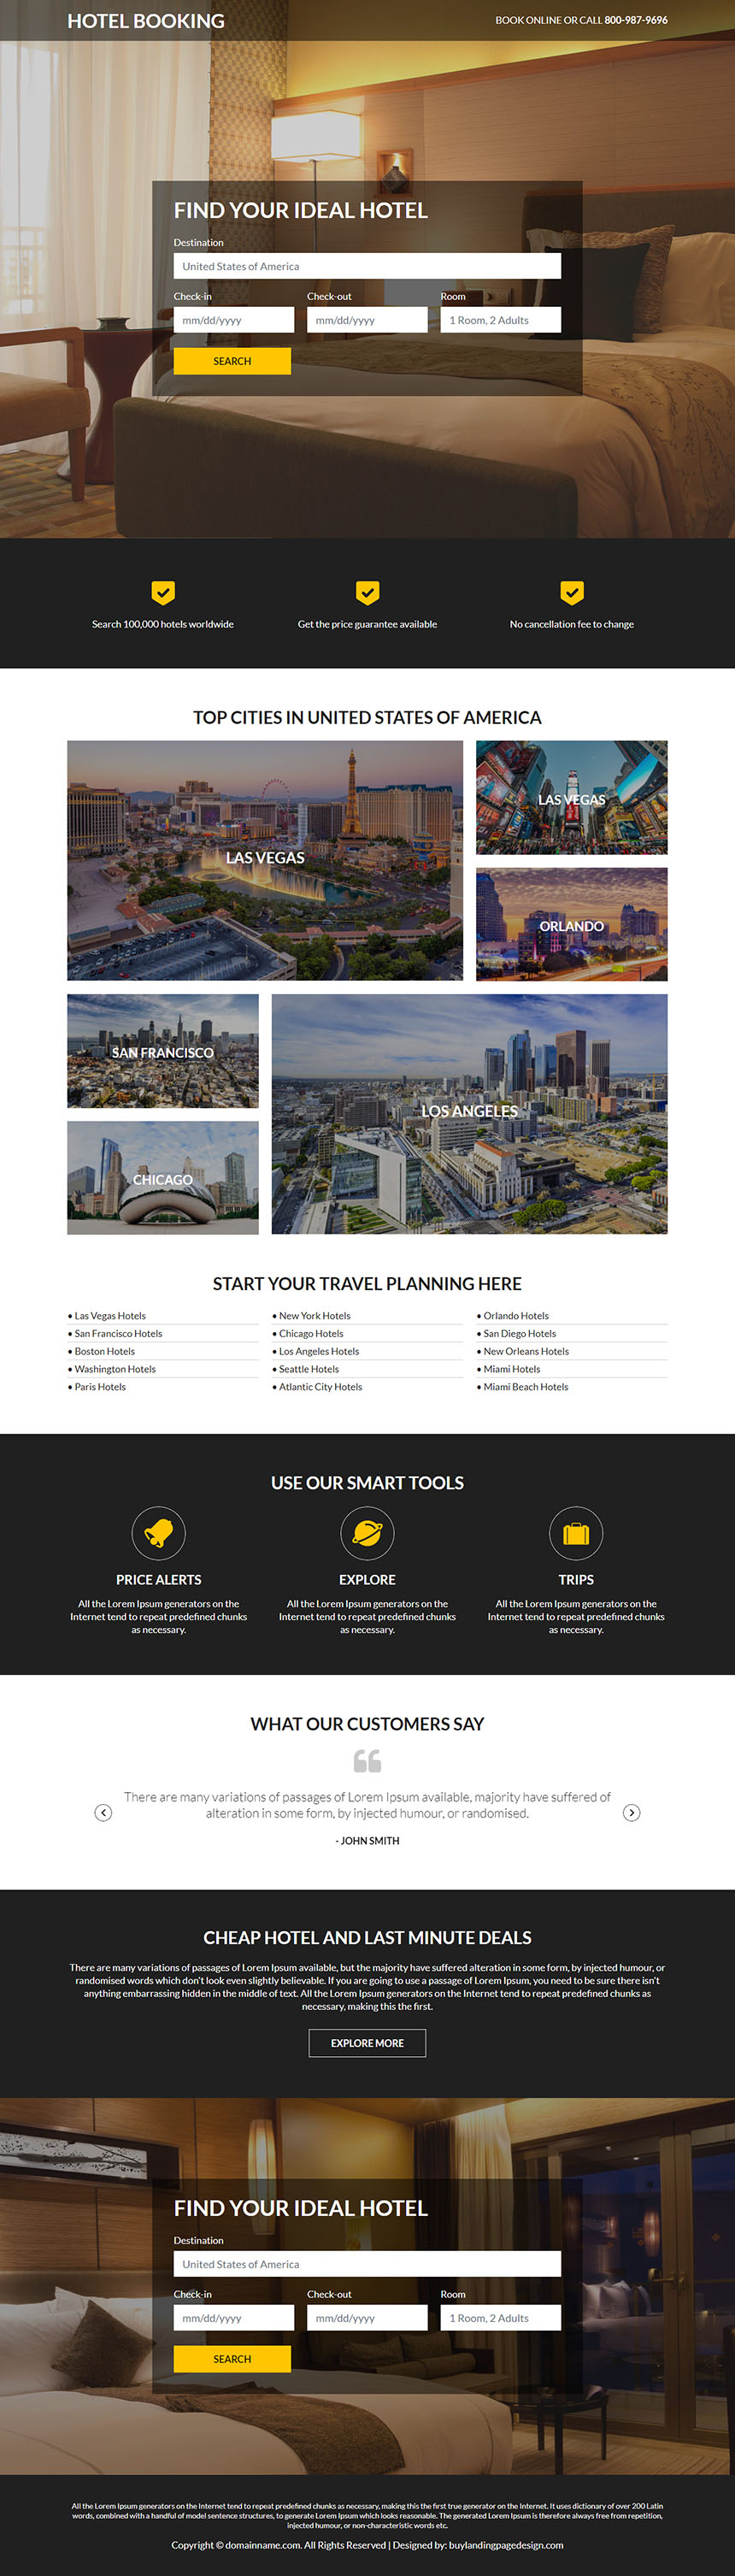 online hotel booking service responsive landing page